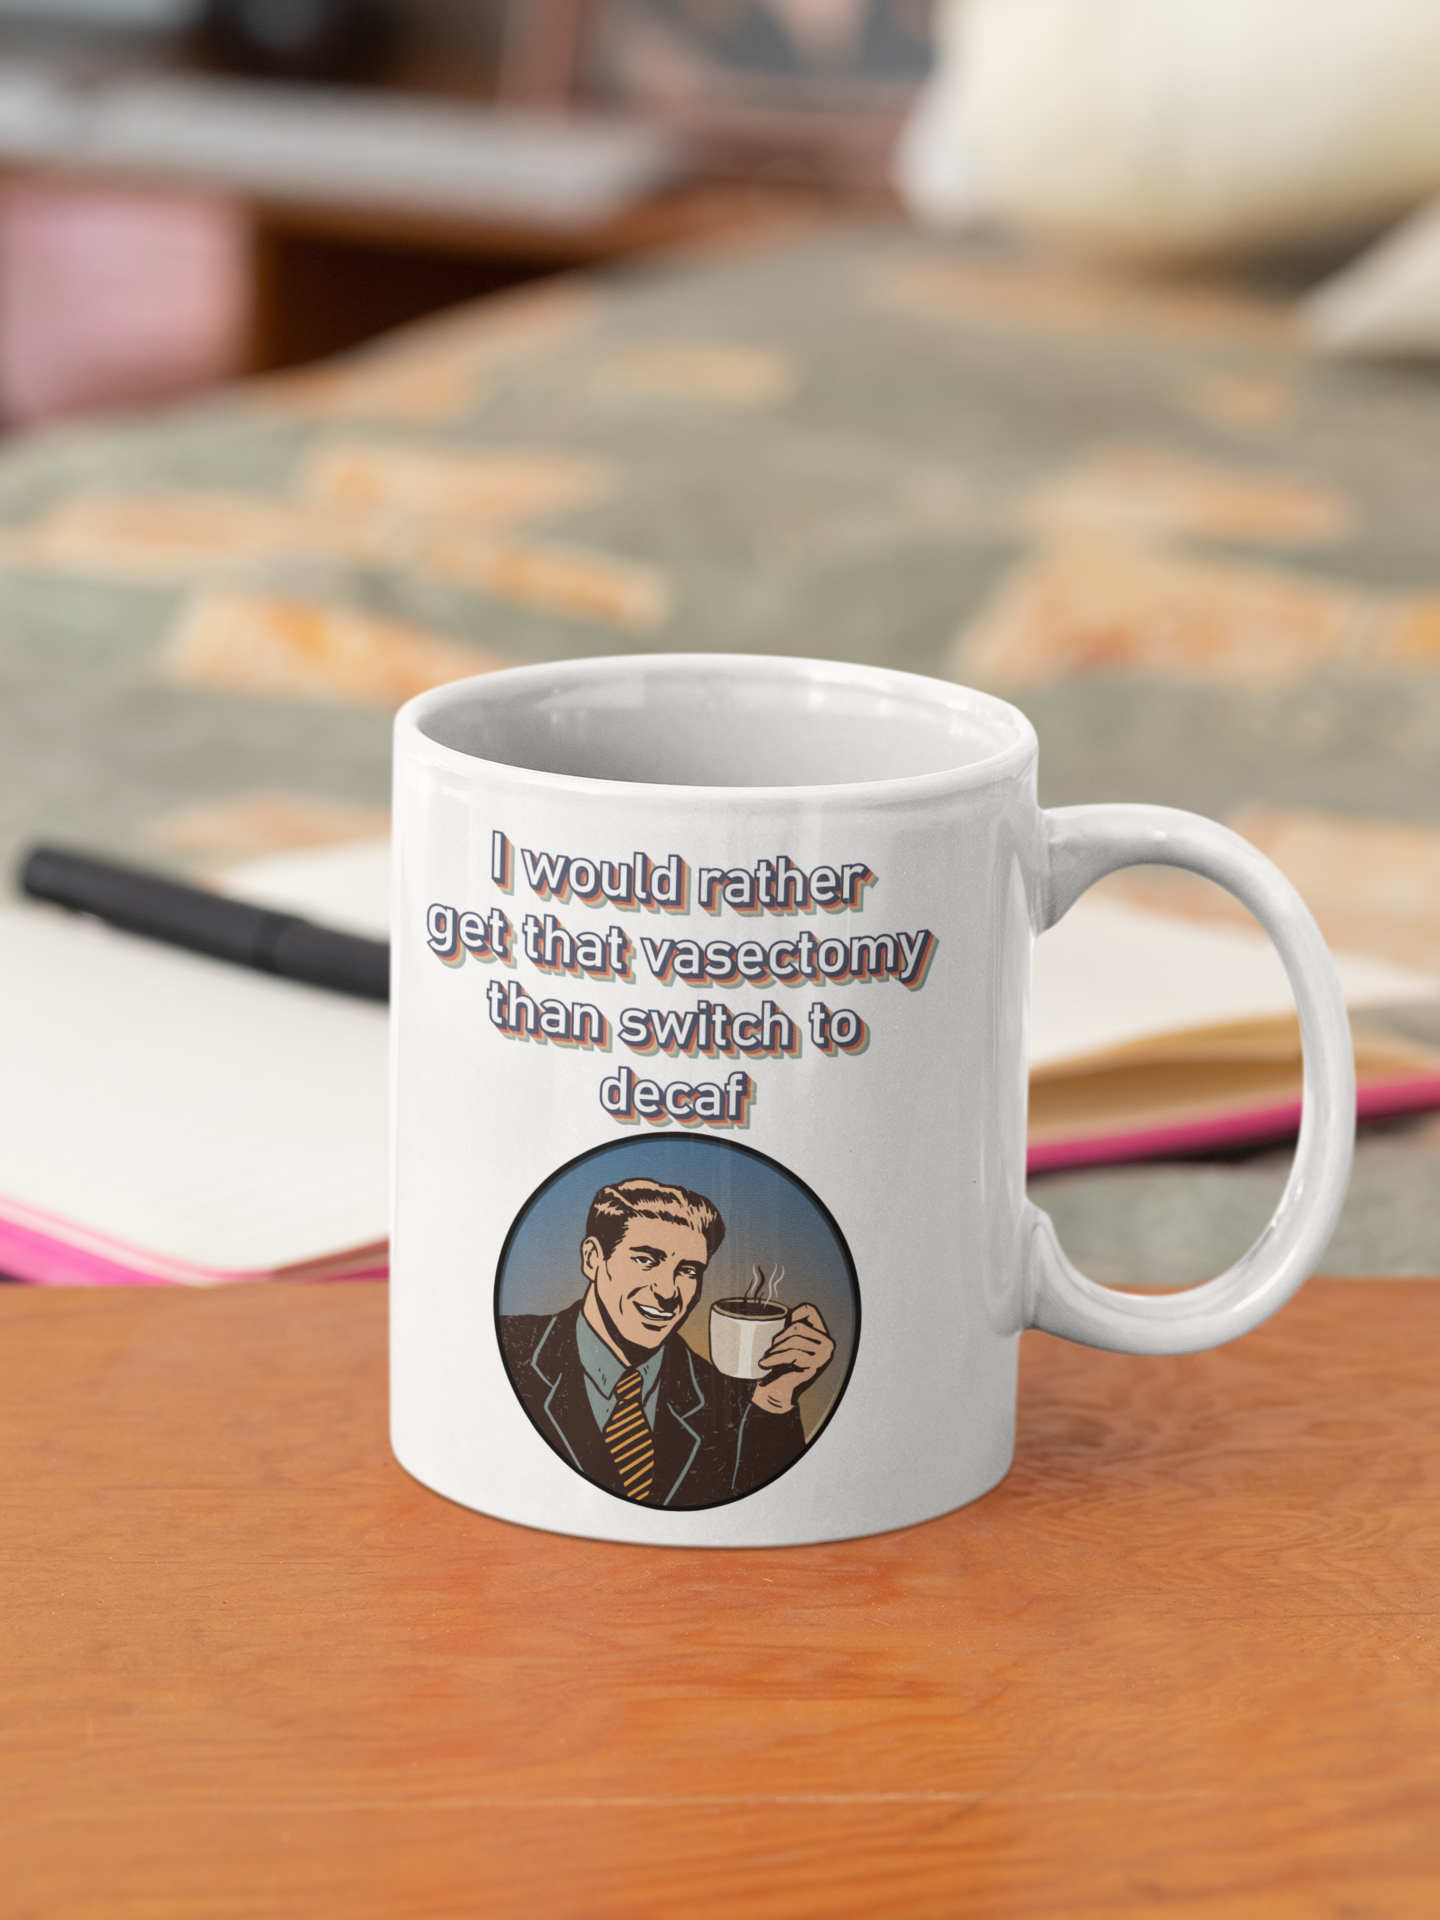 I would rather get a vasectomy than switch to decaf adult mug birthday gift boyfriend gift Christmas gift co-worker gift coffee mug coworker gift custom mug dads day gift dishwasher safe mug fiance gift funny coffee mug funny mug gift for boyfriend gift for dad gift for grandpa gift for her gift for him gift for husband gift for mom gift for sister gift for wife gift idea girlfriend gift Husband Gift moms gift mothers day gift mug school gift sports teacher gift Unique gift wife gift